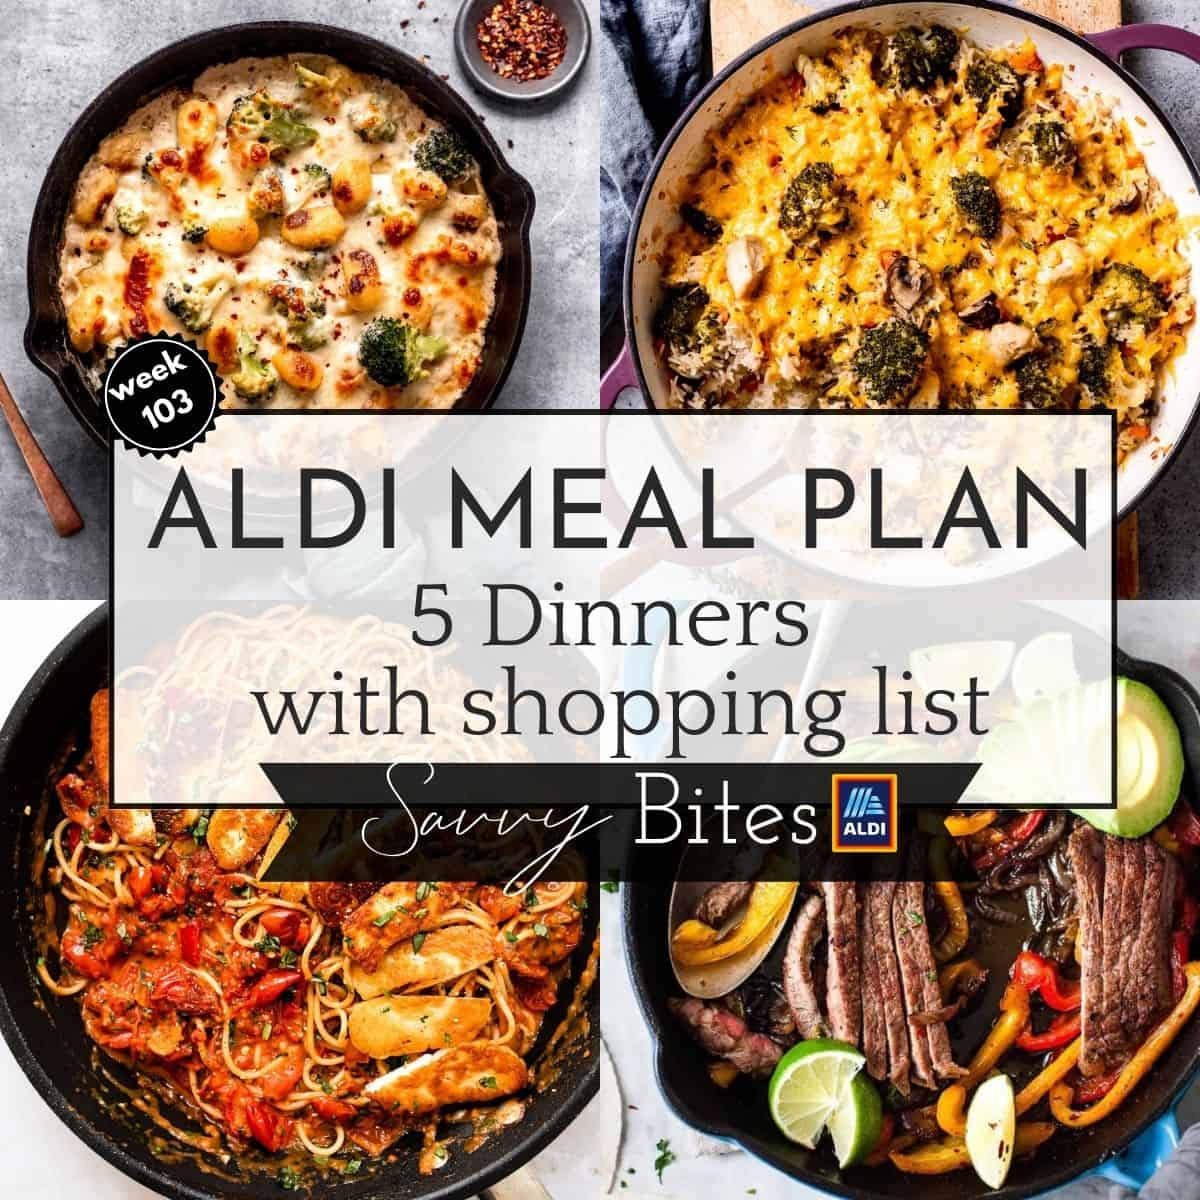 Weekly budget family meal plan using Aldi ingredients.